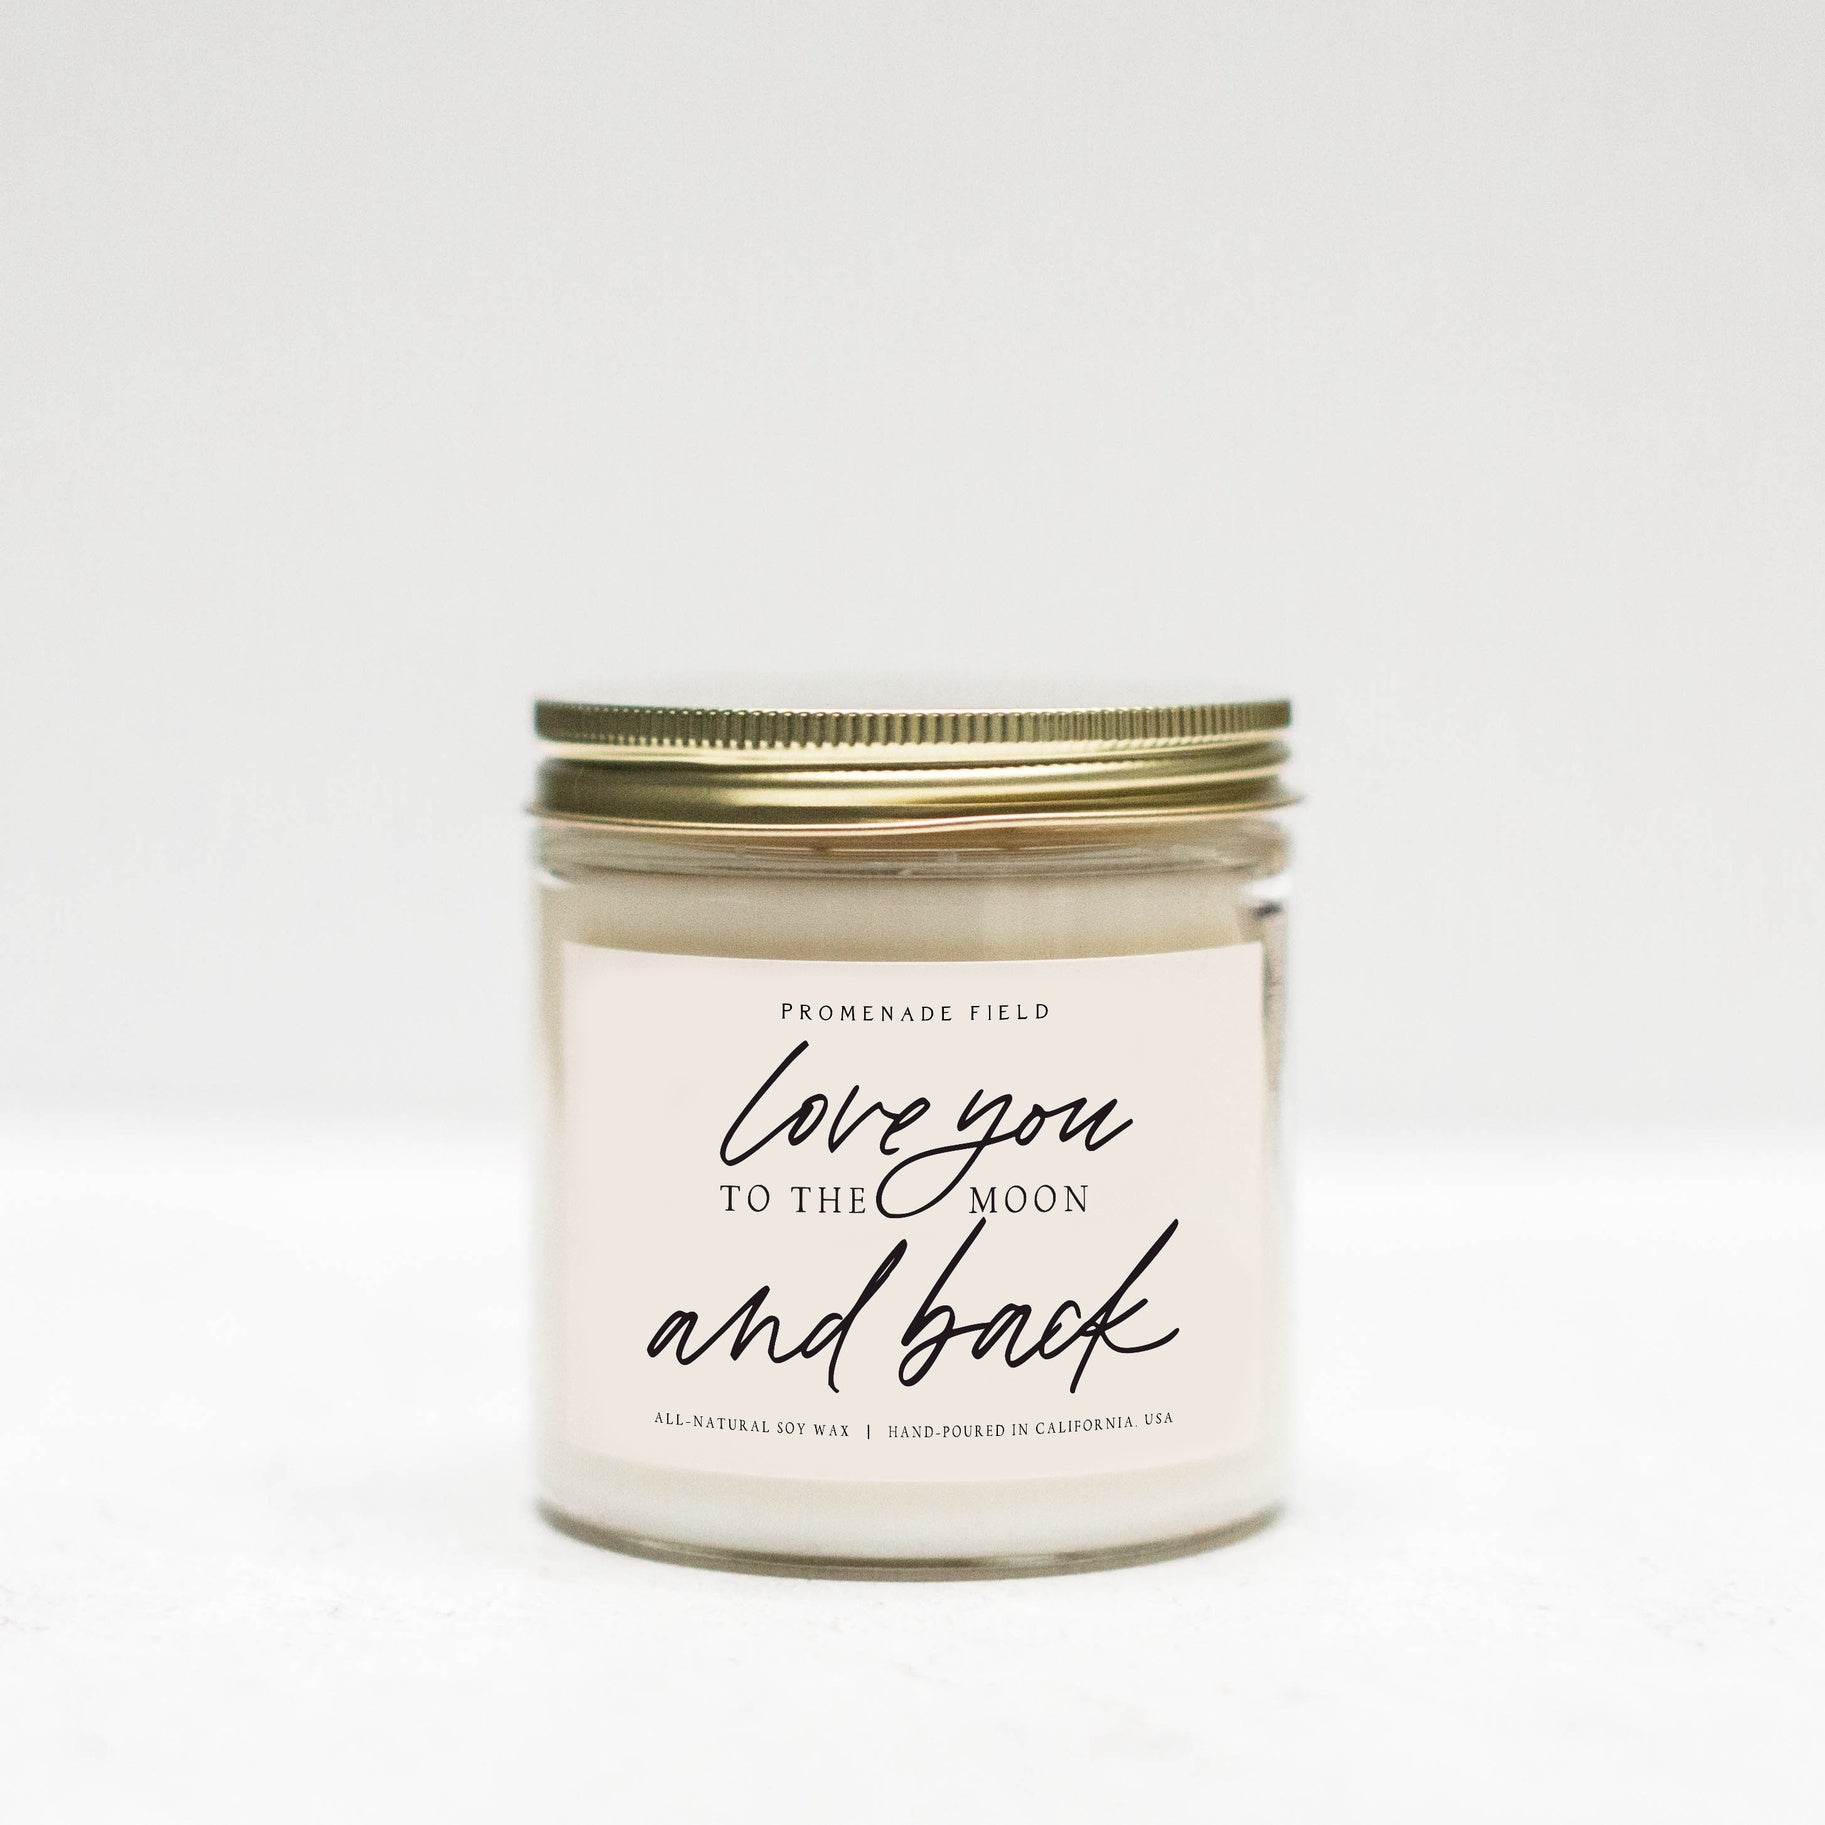 Jar candle with gold lid, white label which says "Love you to the moon and back" in cursive font.